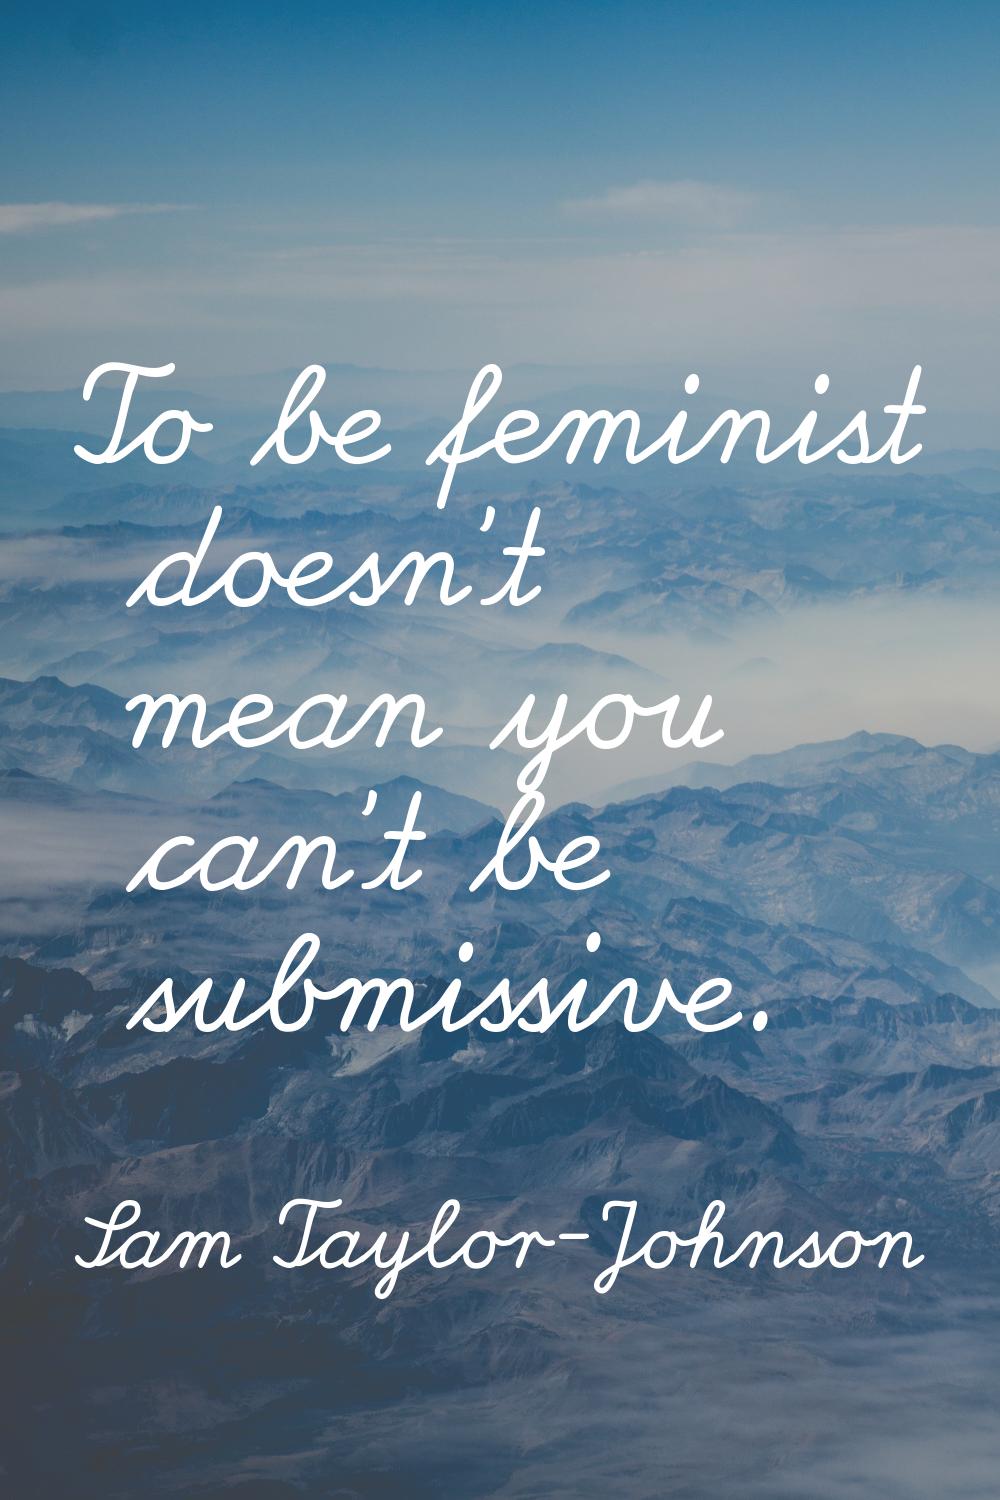 To be feminist doesn't mean you can't be submissive.